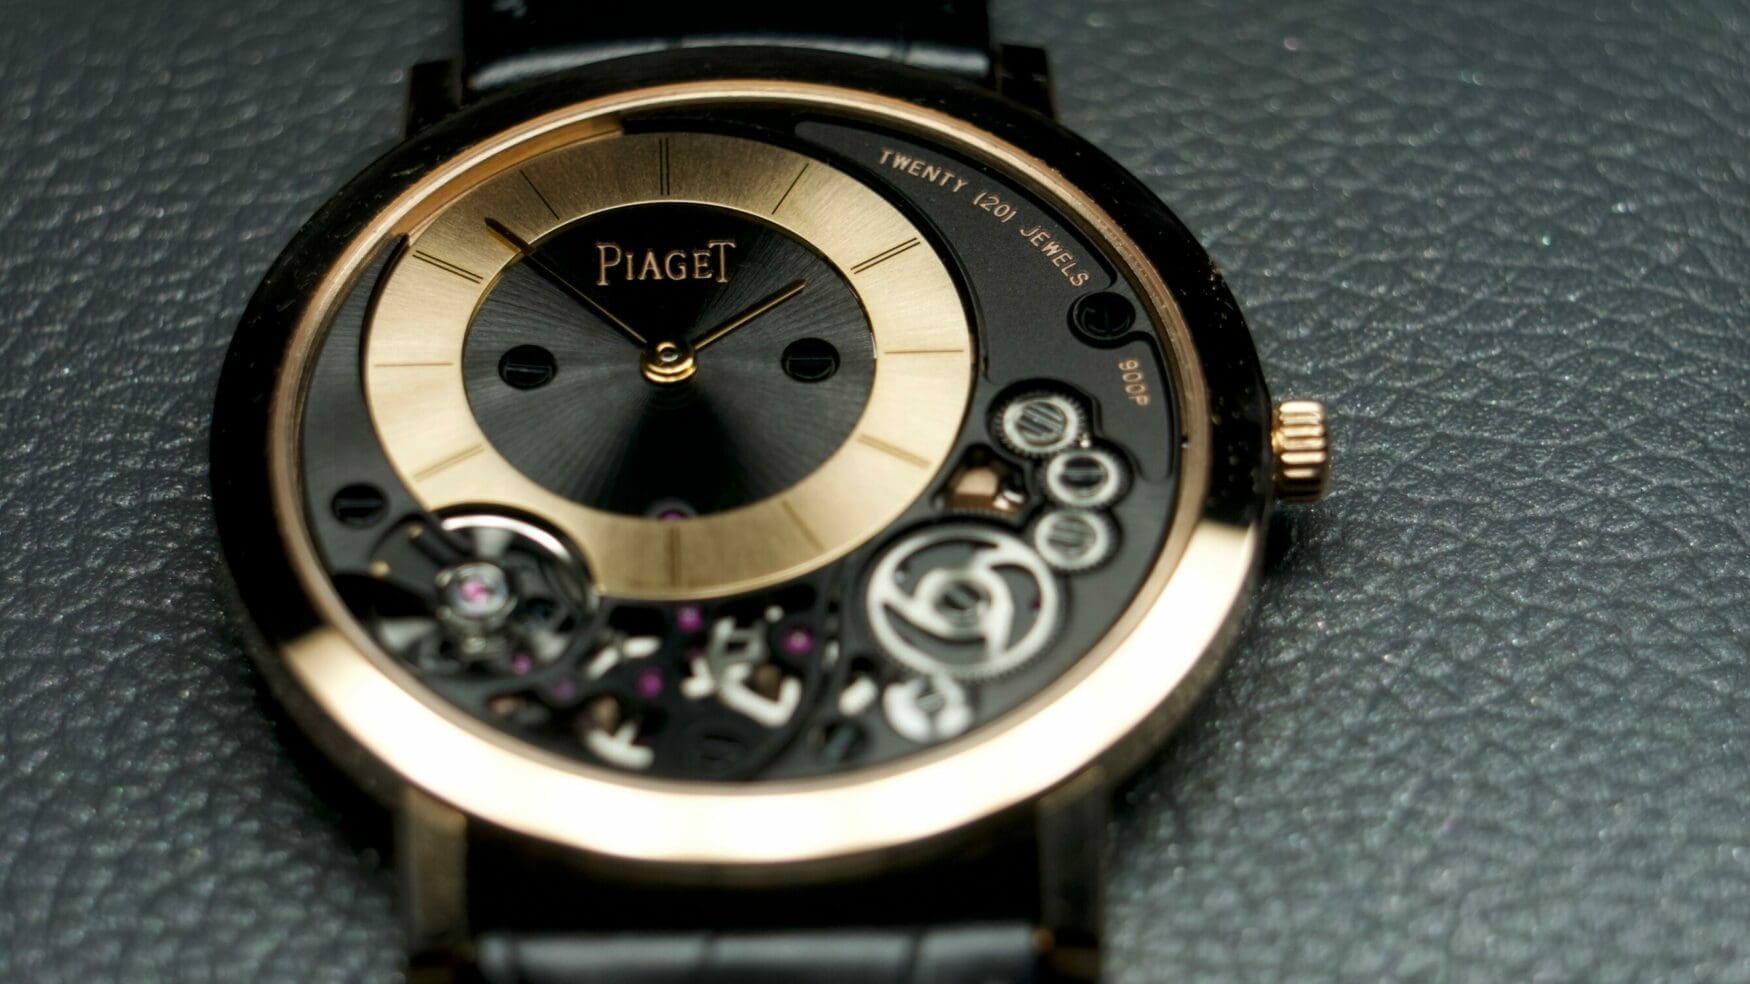 TRADING FACES: Why I just gave up five Kurono watches for this one Piaget